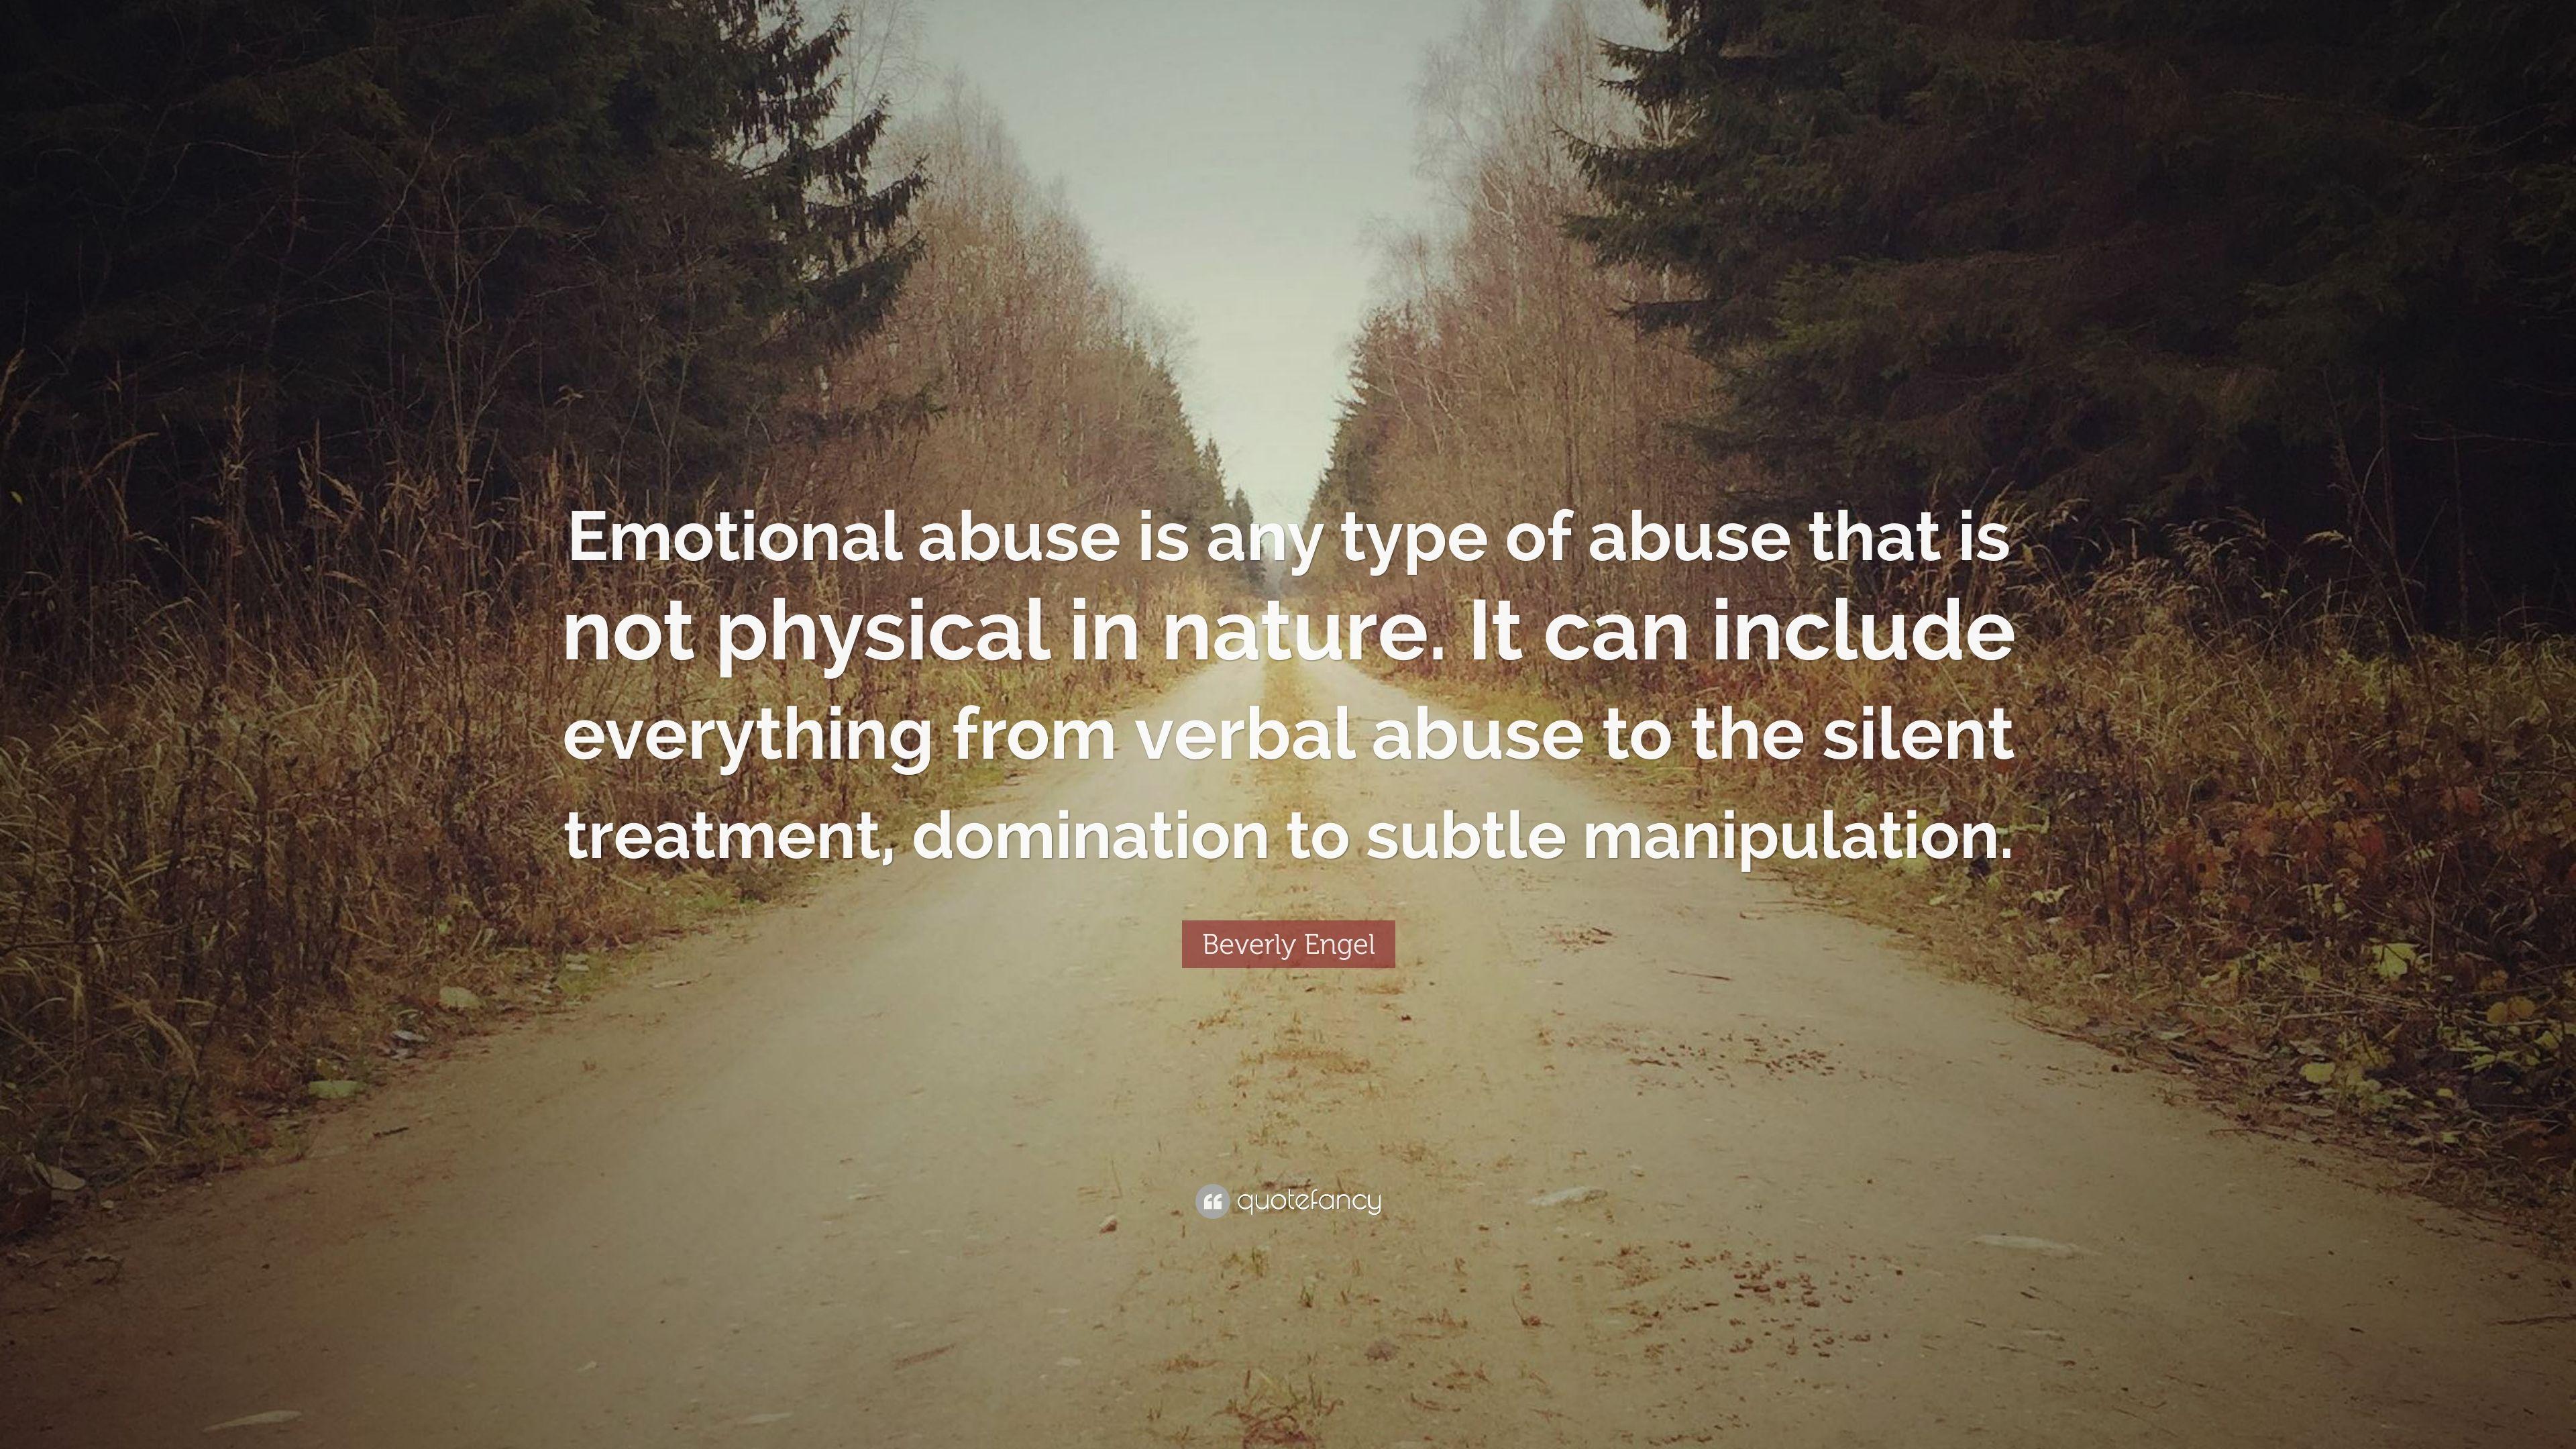 Beverly Engel Quote: “Emotional abuse is any type of abuse that is